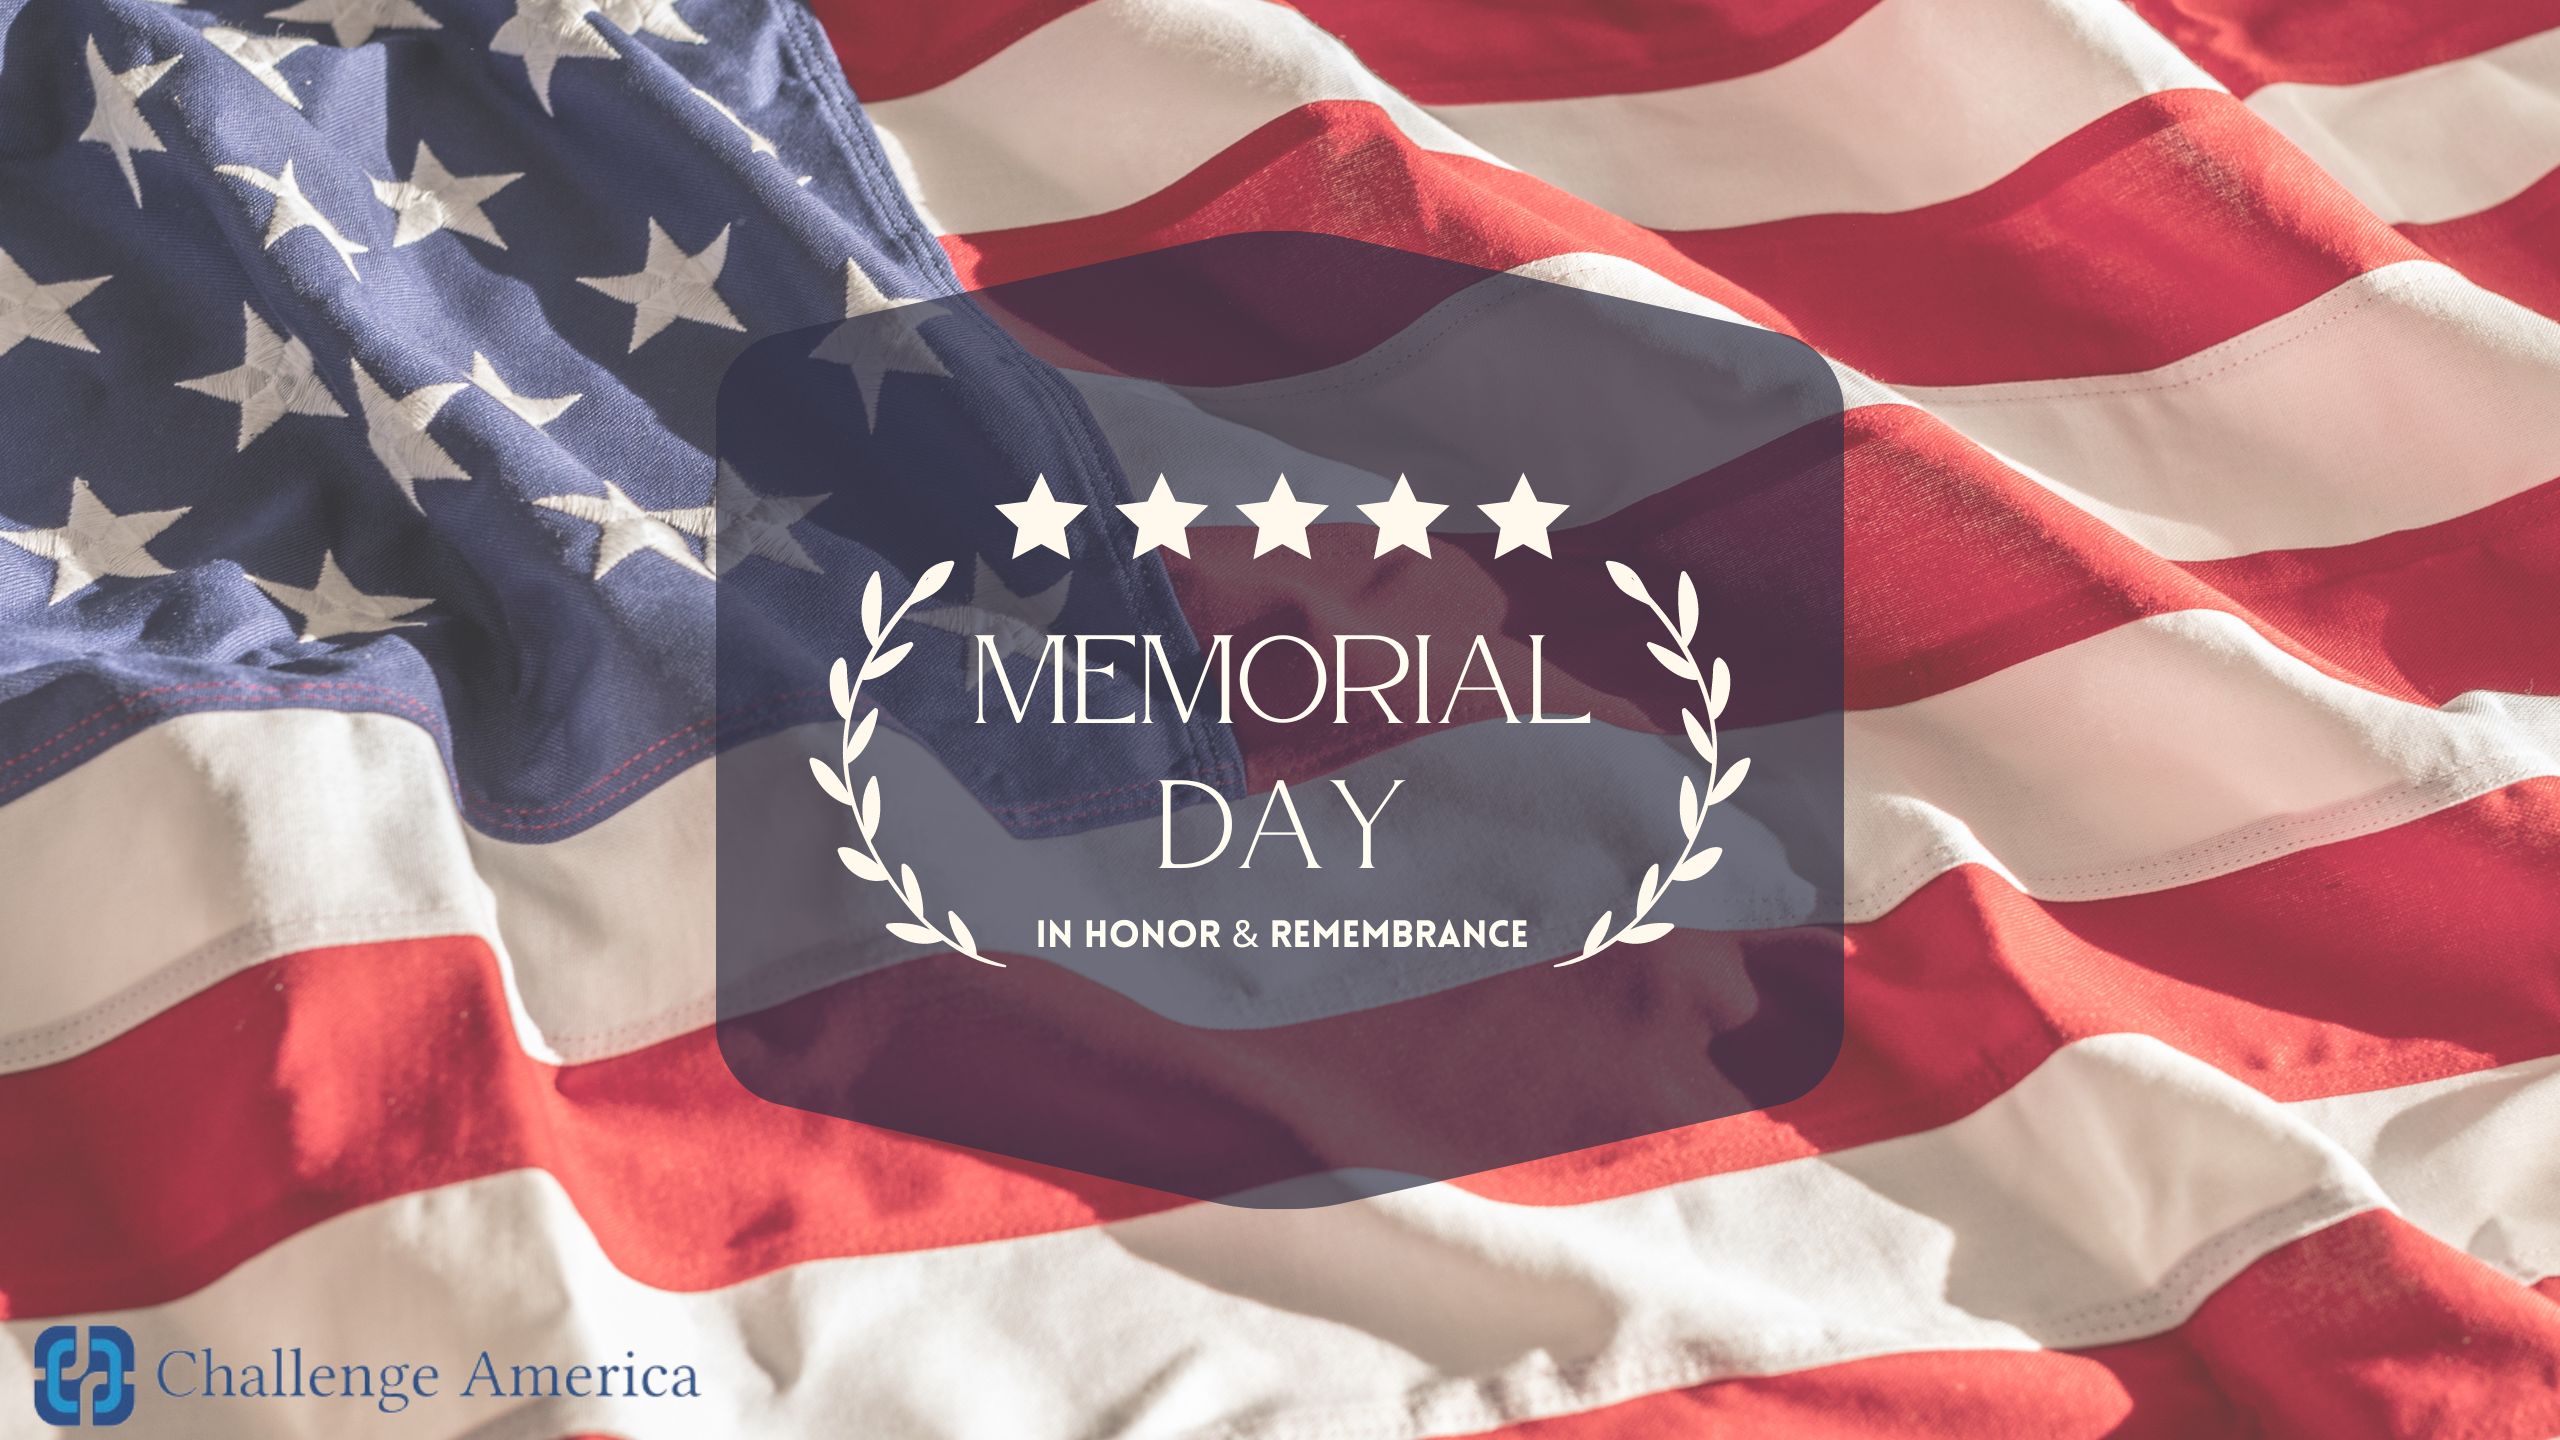 Continue reading Challenge America offers a special Memorial Day message for Veterans & service members